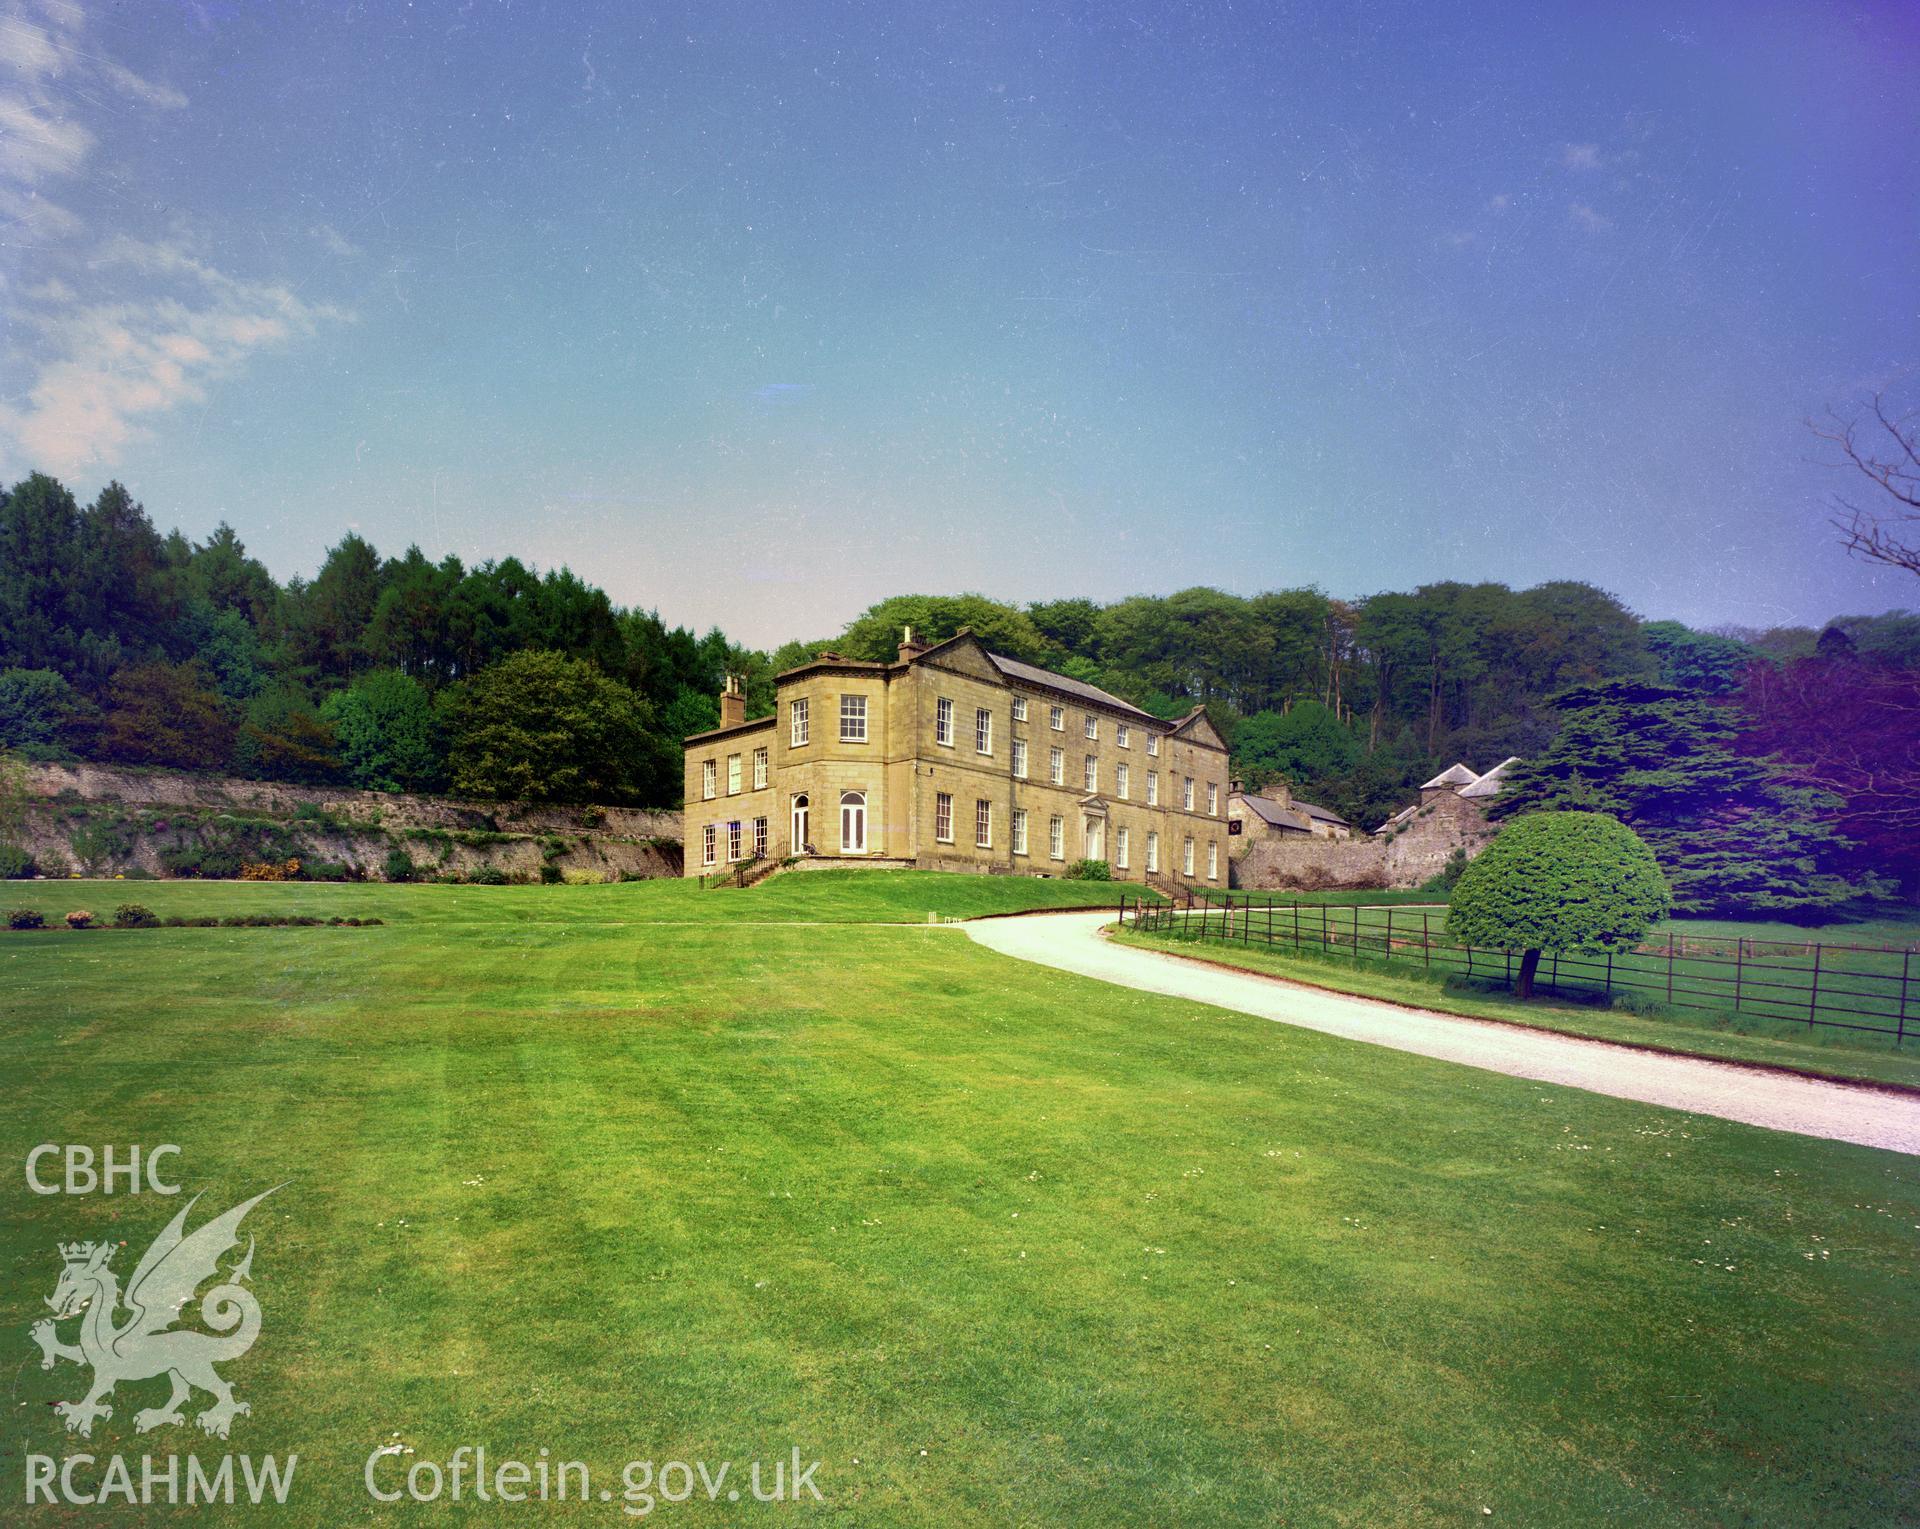 RCAHMW colour transparency showing view of Llanharan House